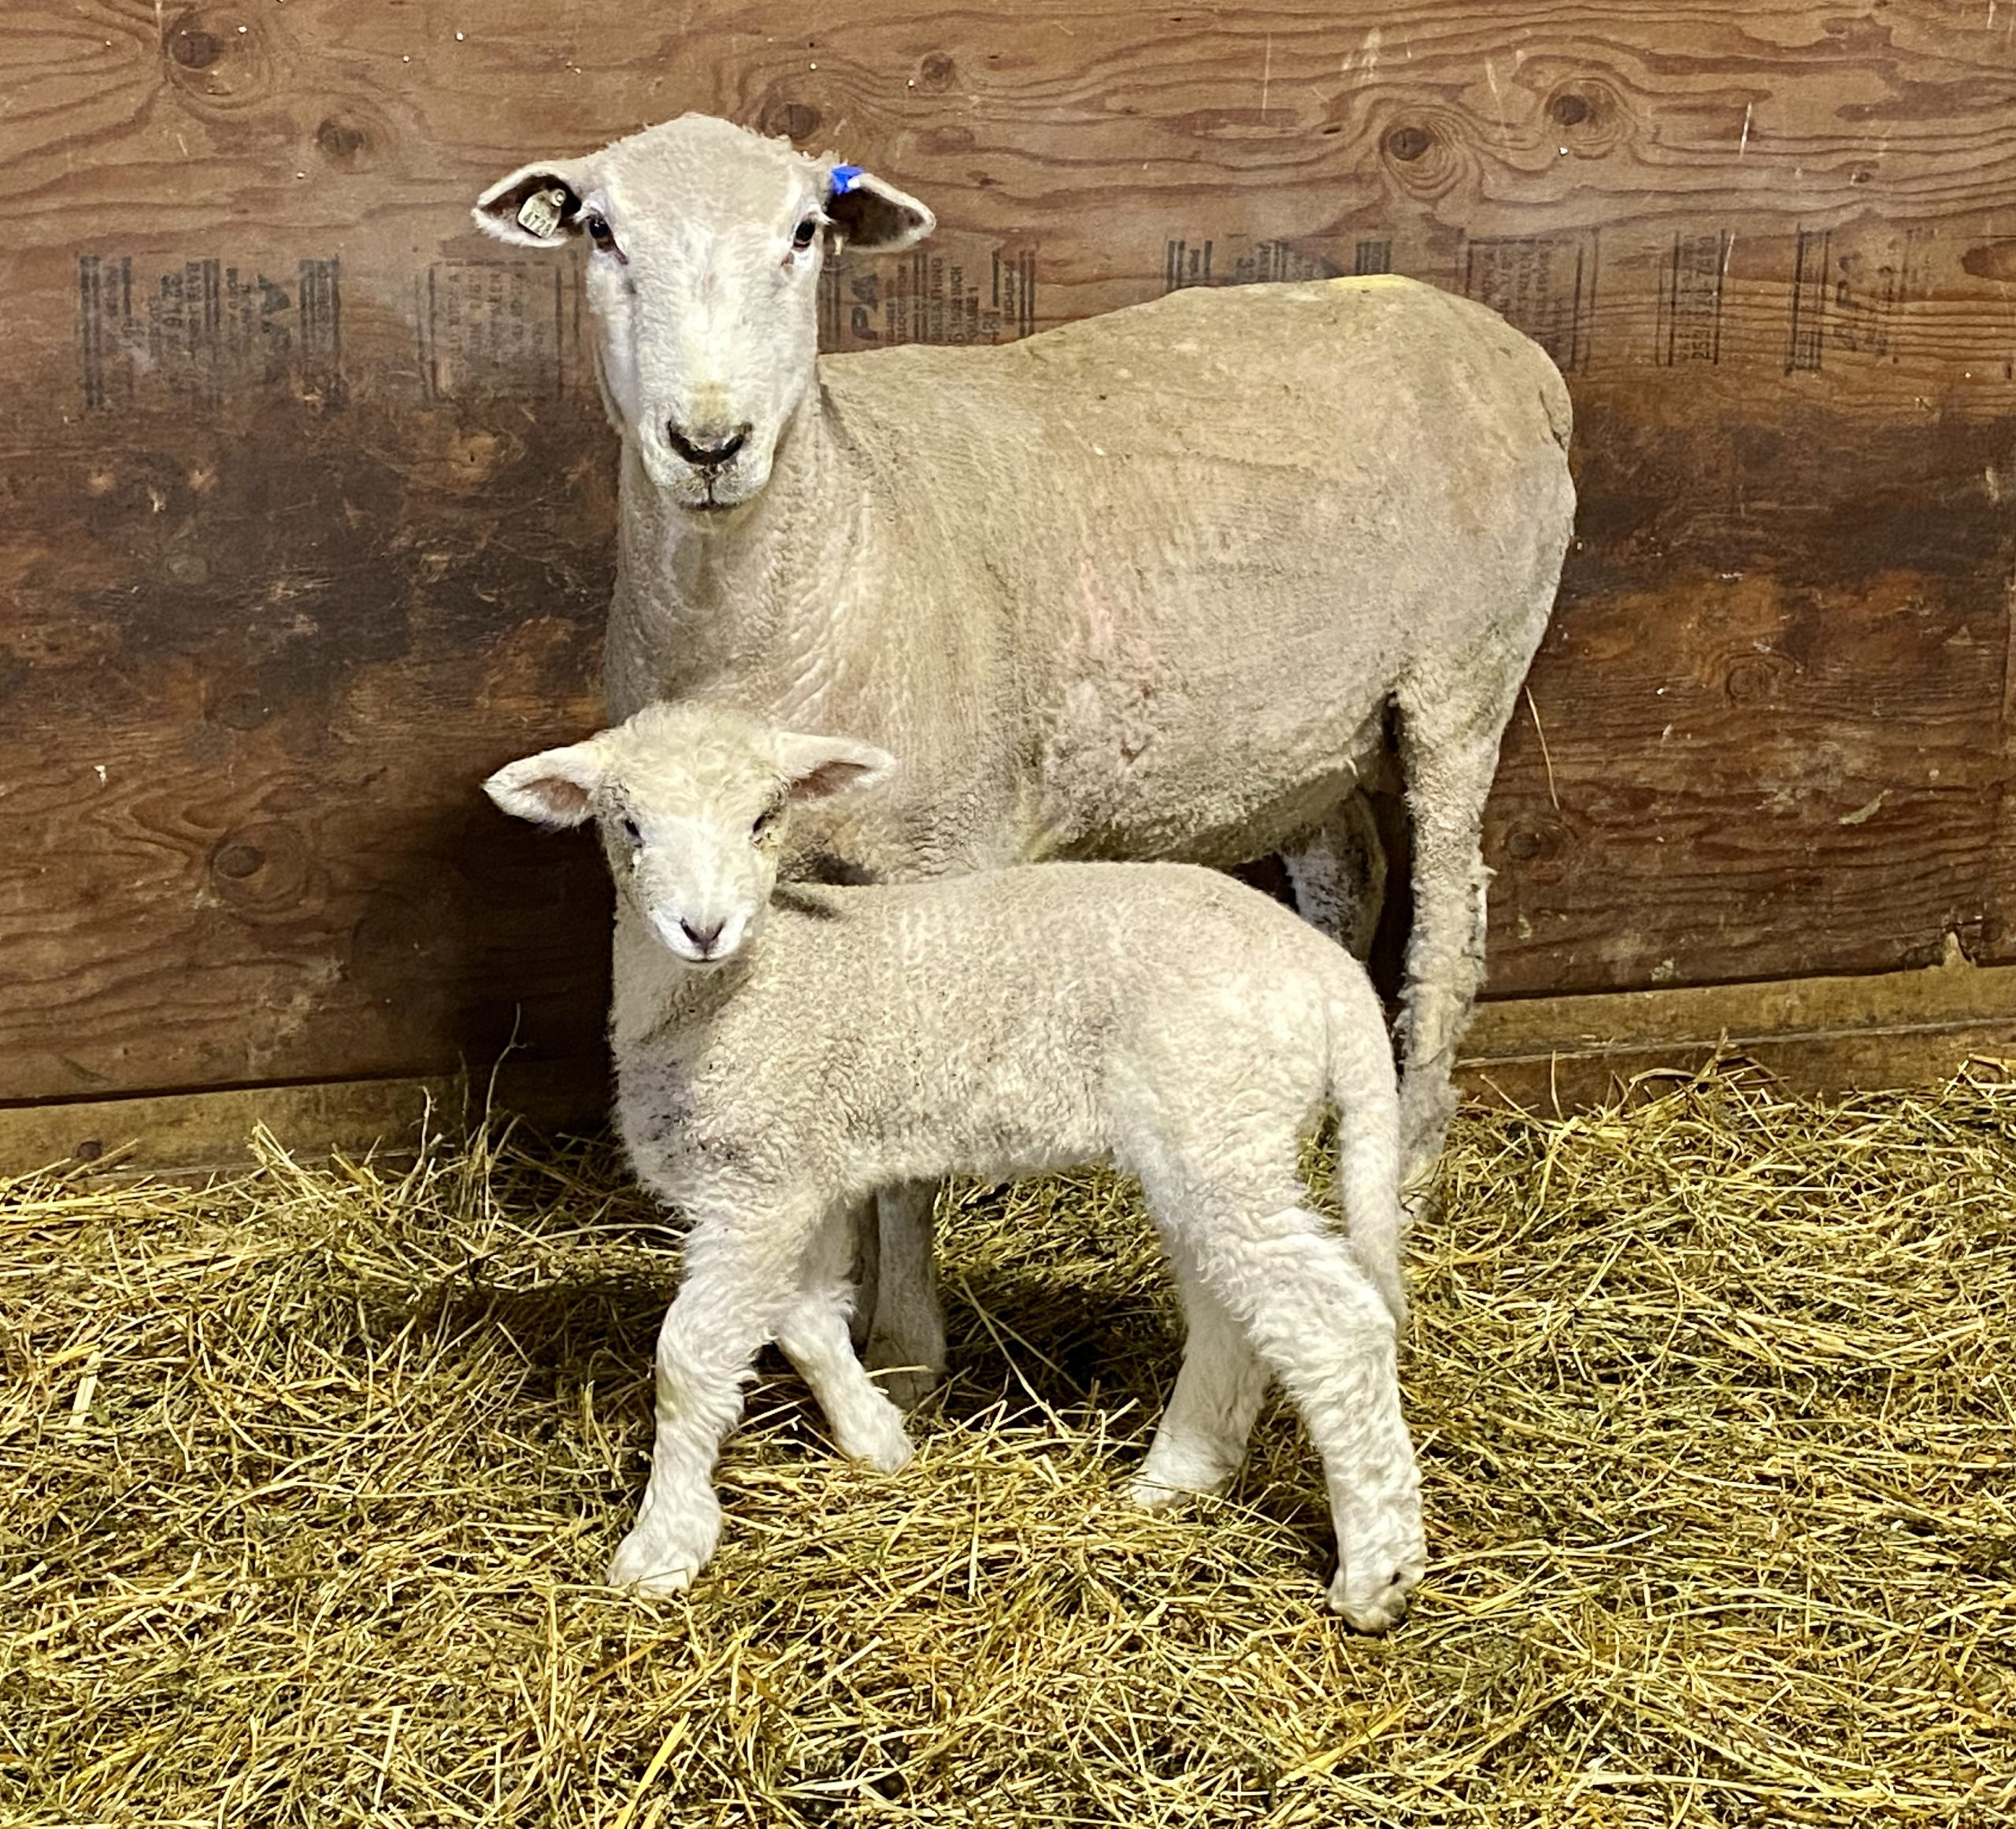 Thursday Afternoon Ag News, Jan 28  2021:  Lamb Industry Adjusts to Consumer Trends, China Pushes for Summit with Biden Administration